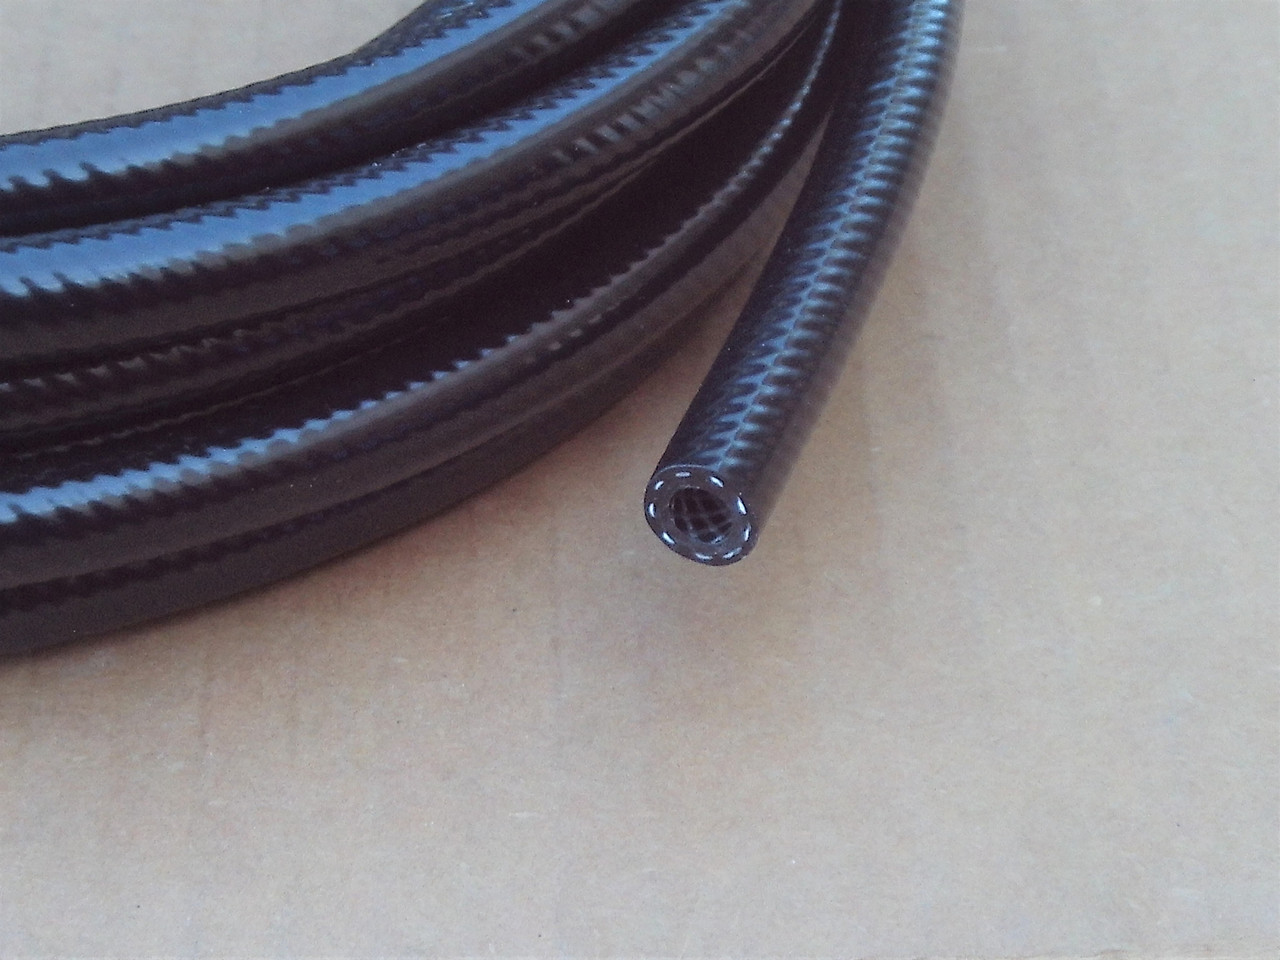 Fuel Line for Club Car 1012293, 1012297, 1012298, 1012458, 1013290, 1013679, 1013681, 1013682, 1013692, 25 Foot Long Shop Pack, ID: 1/4" OD: 1/2" gas hose